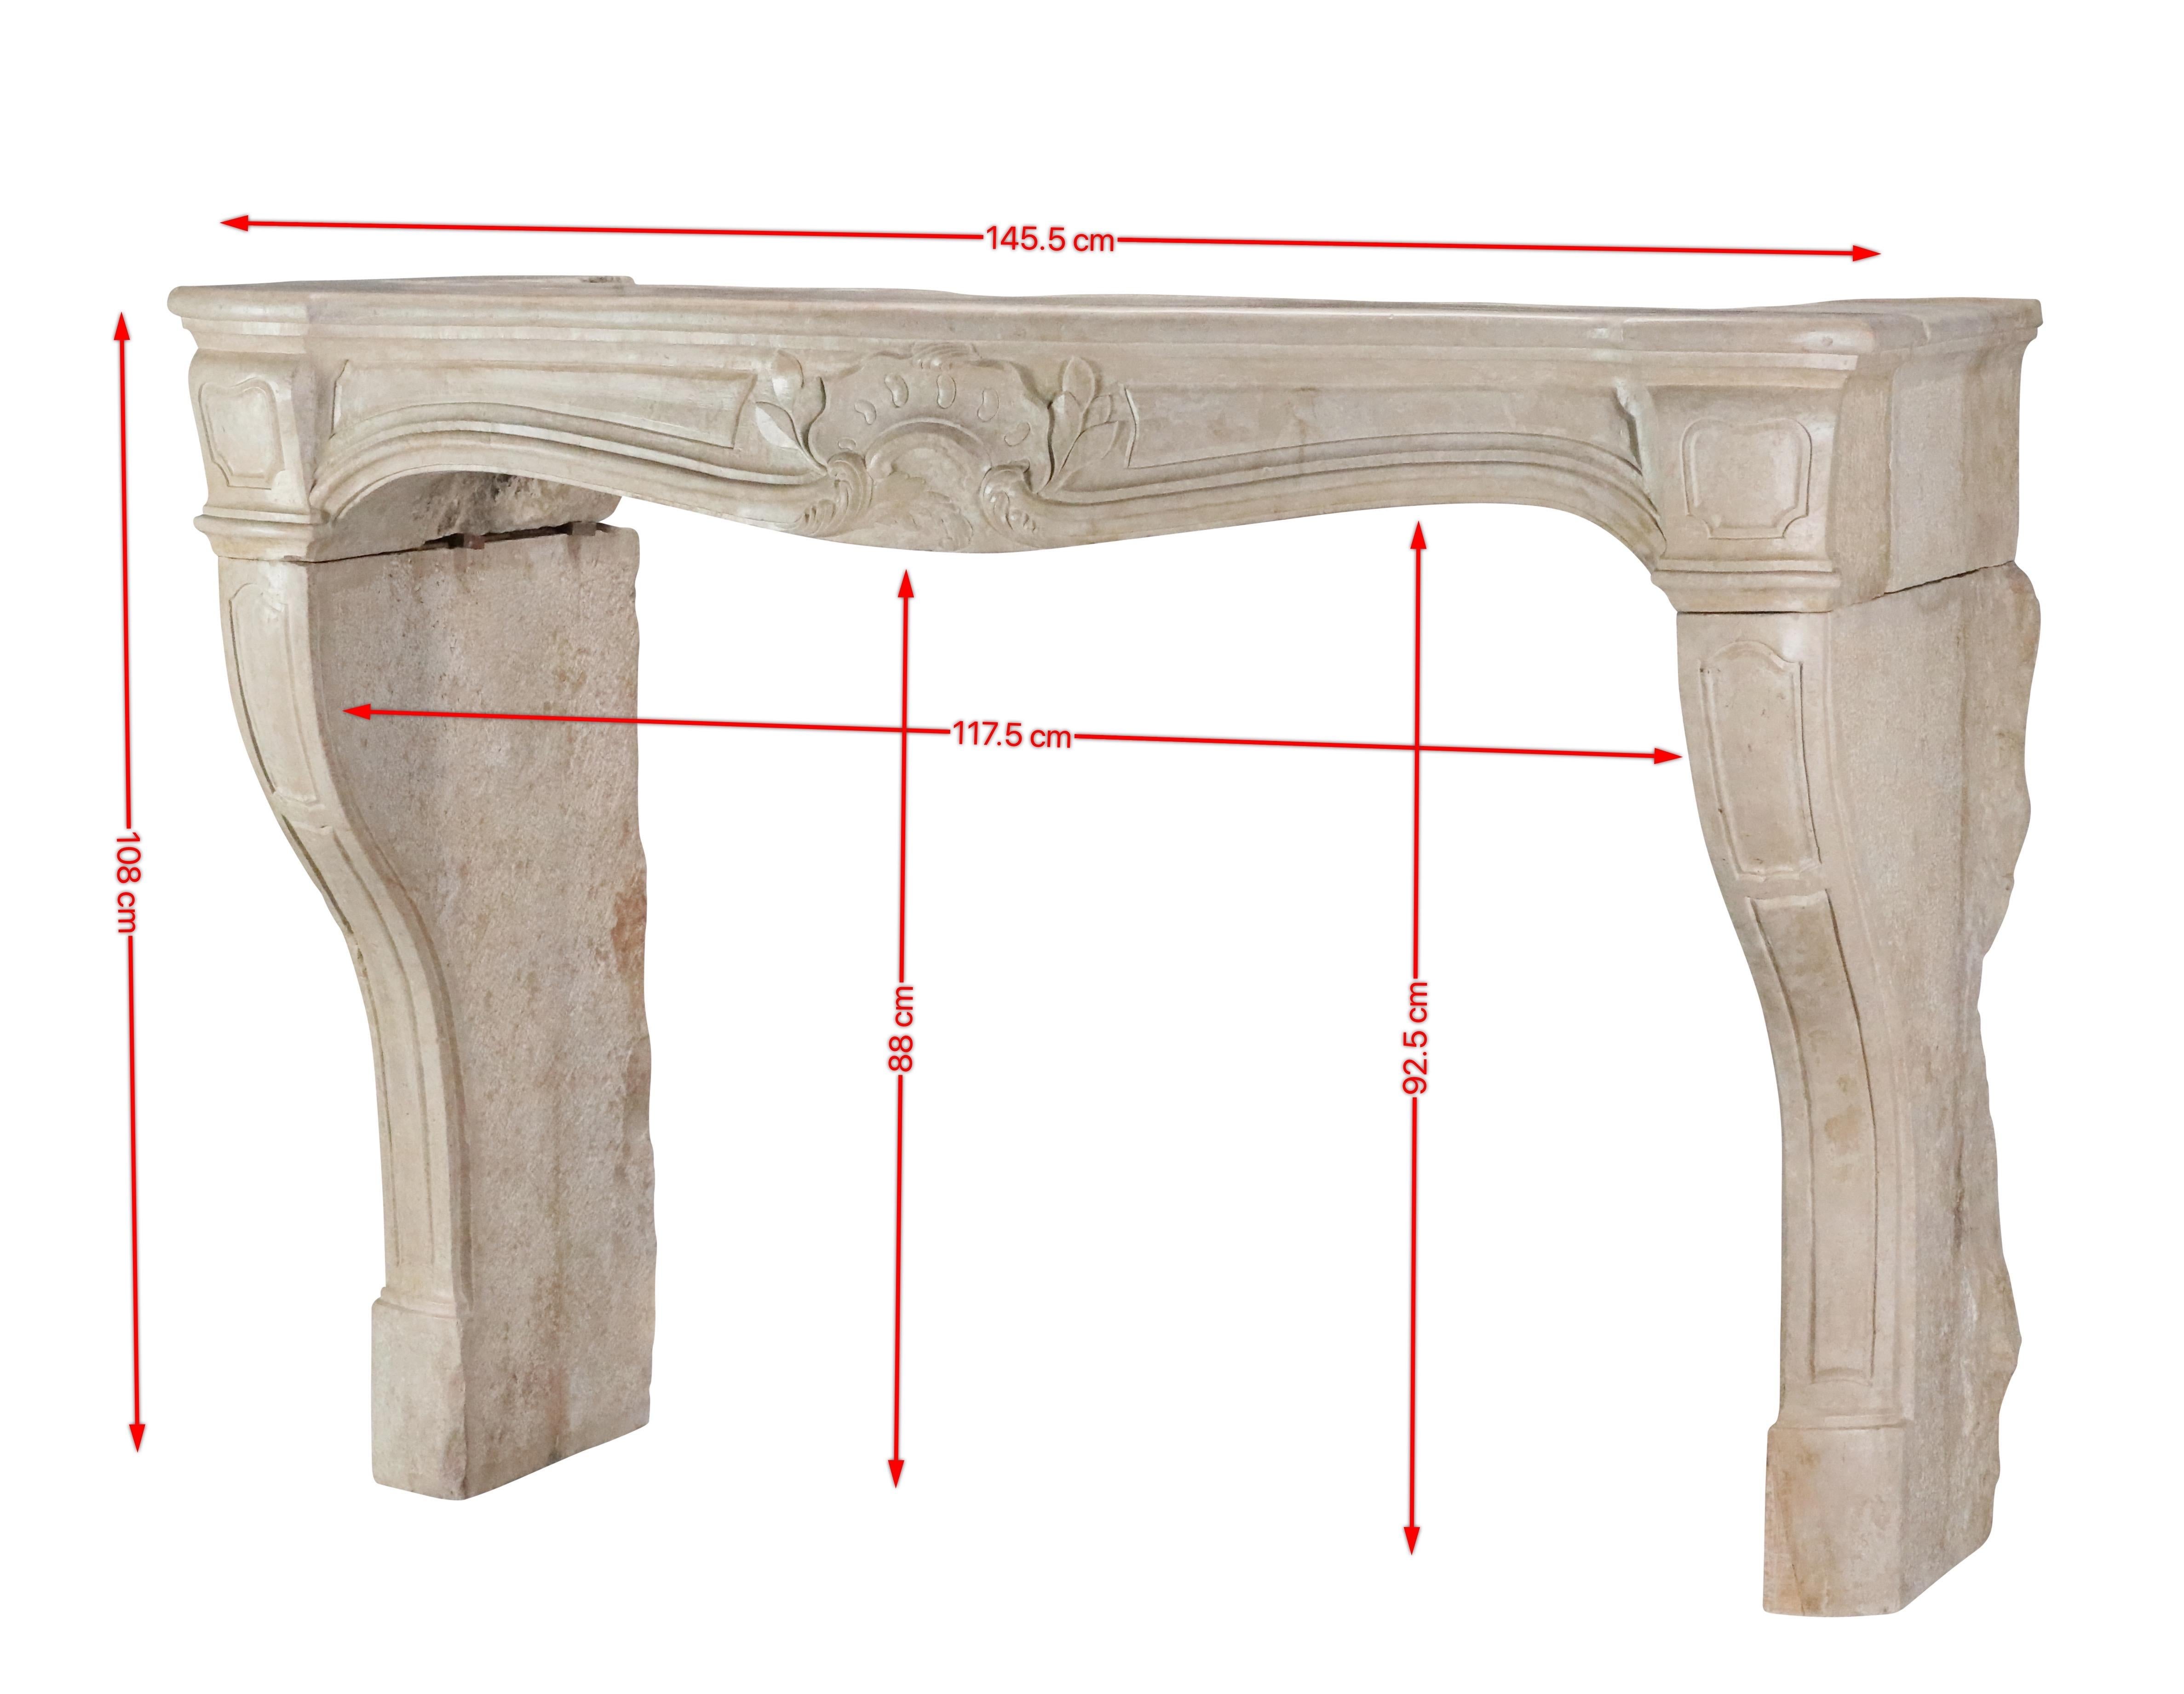 Classic French antique fireplace surround from the 18th century period. The limestone is waxed. This regency period decorative chimneypiece creates original interior design. Fine carving and small in proportions. An exclusive piece for an authentic